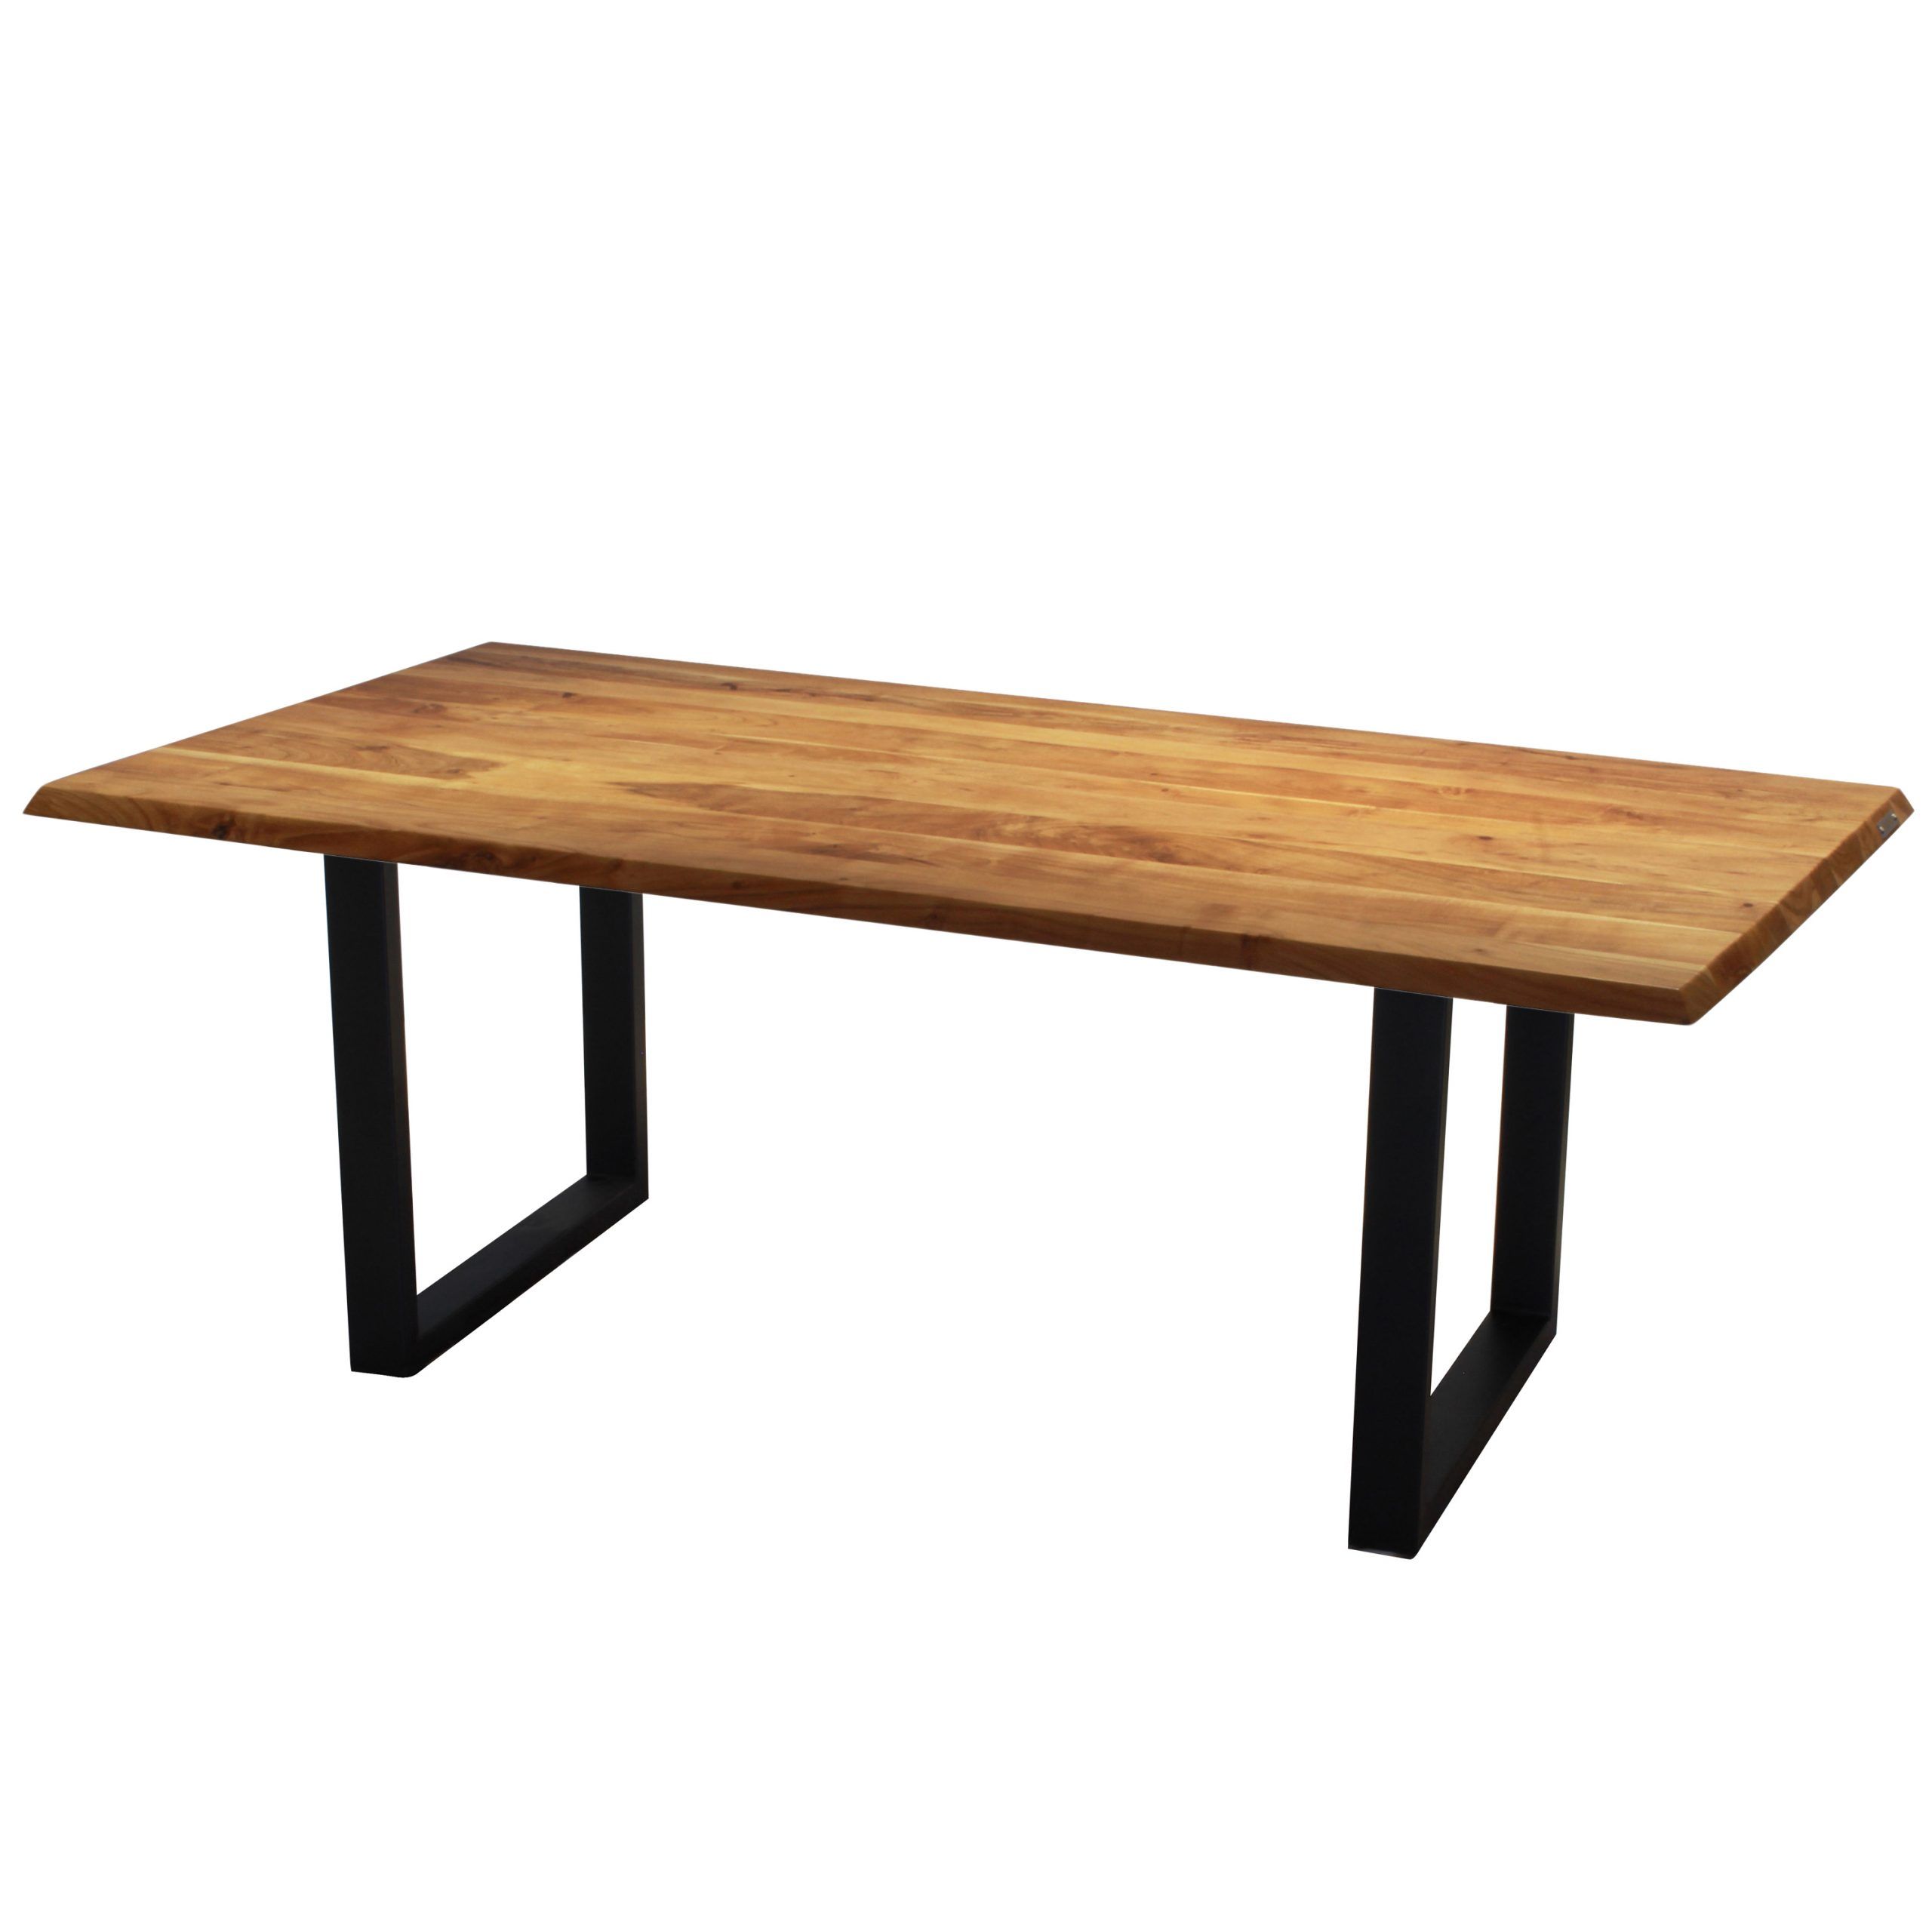 Acacia Dining Tables With Black Victor Legs Within Well Known Corcoran Acacia Live Edge Dining Table With Black Victor Legs – 96" (View 2 of 25)